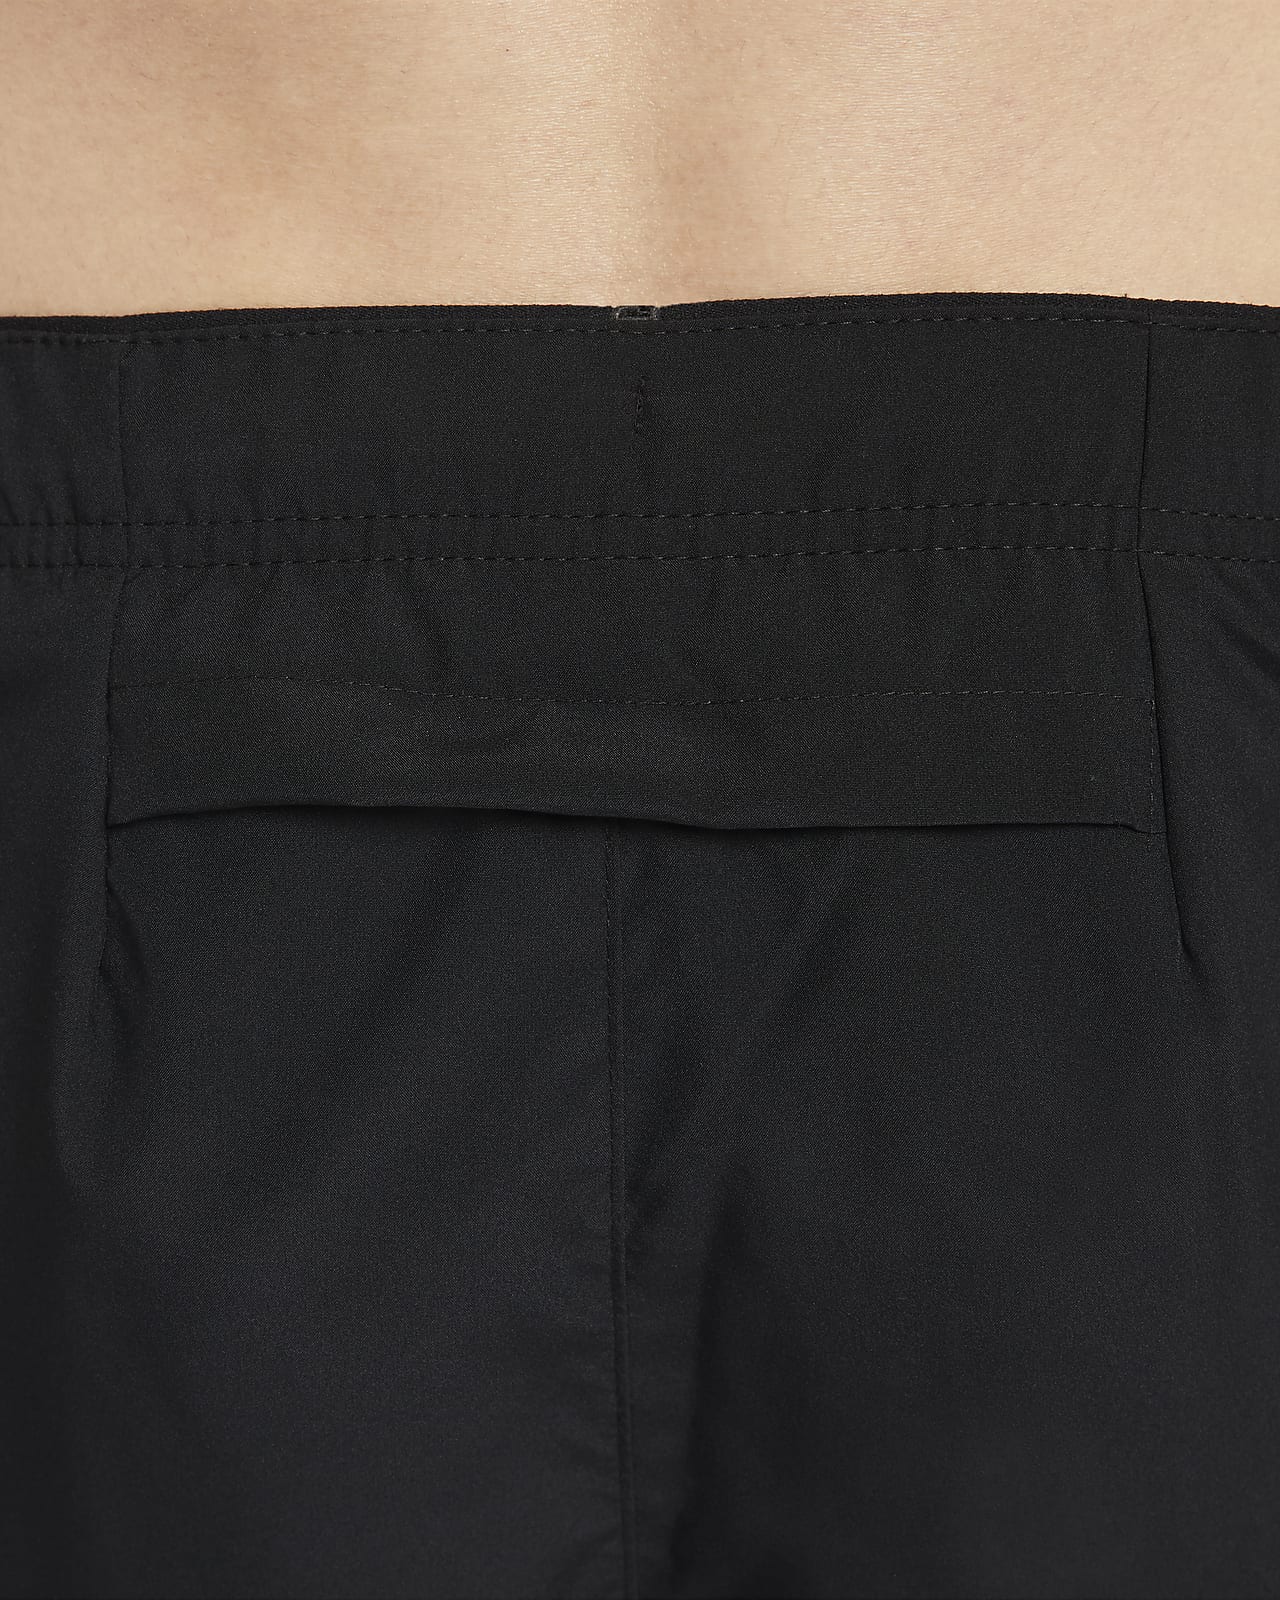 Nike Dri-FIT Run Division Challenger Men's 13cm (approx.) Brief-Lined Running  Shorts. Nike ID